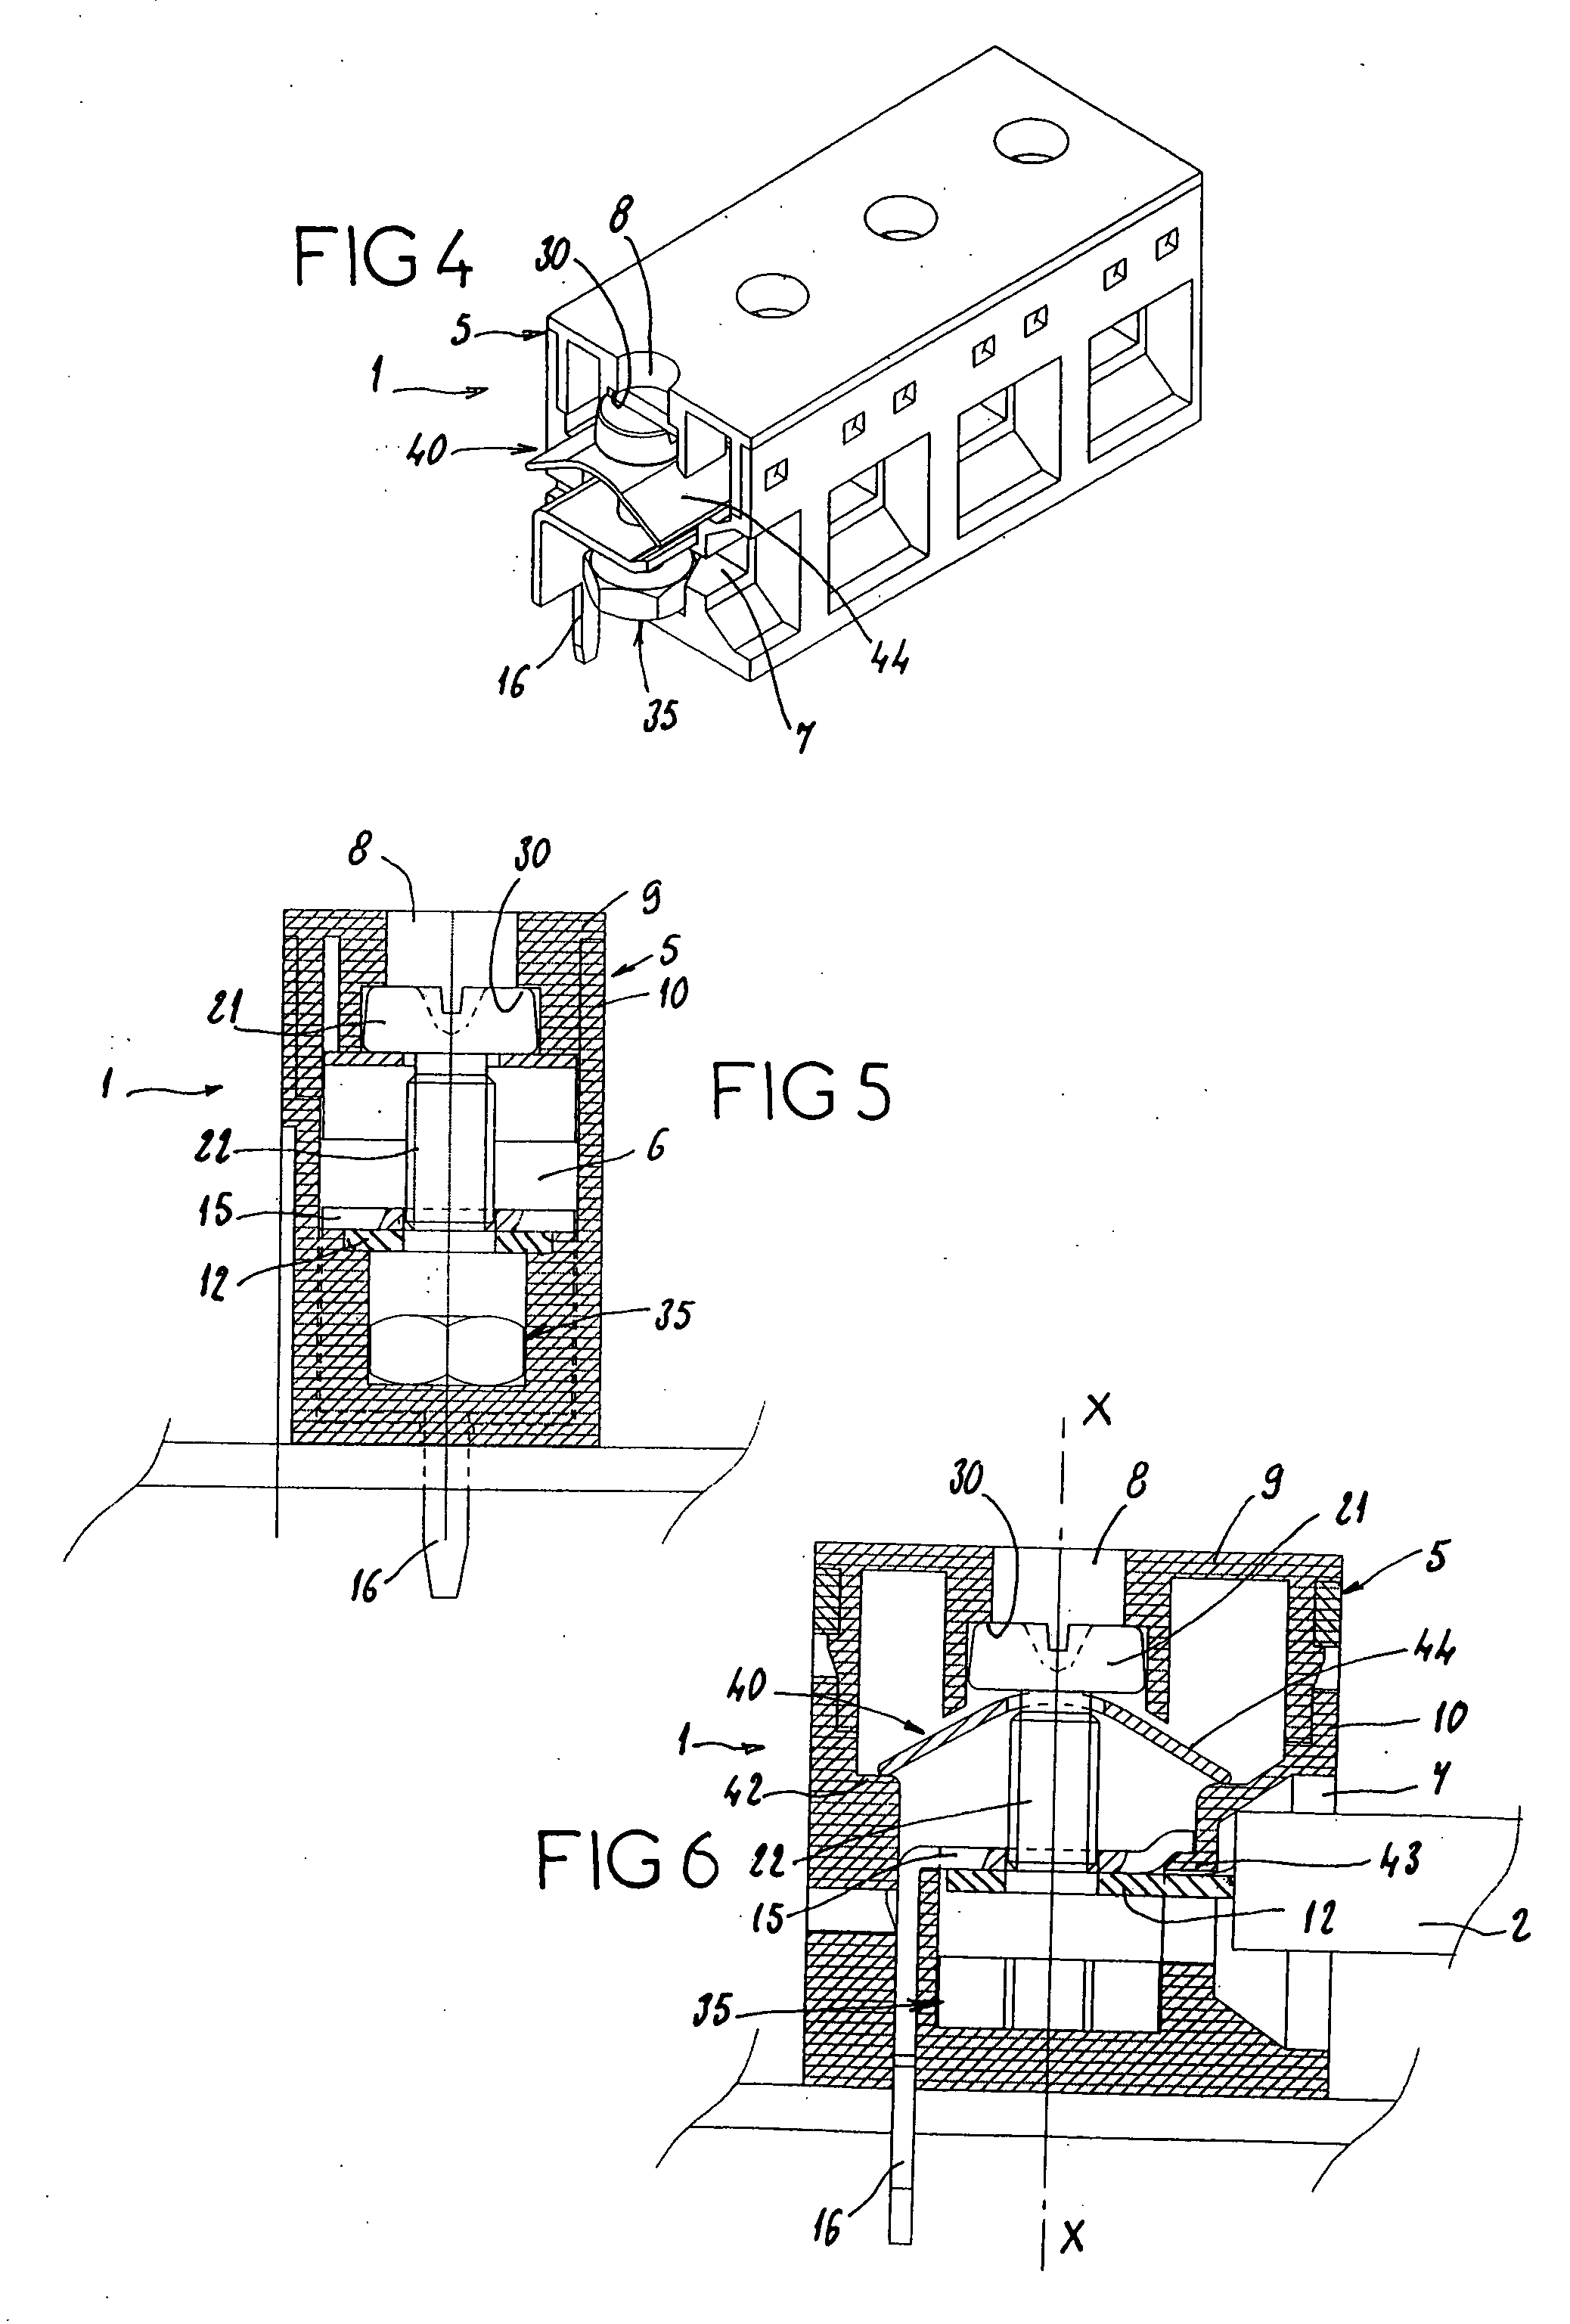 Electrical connection device with protected contact